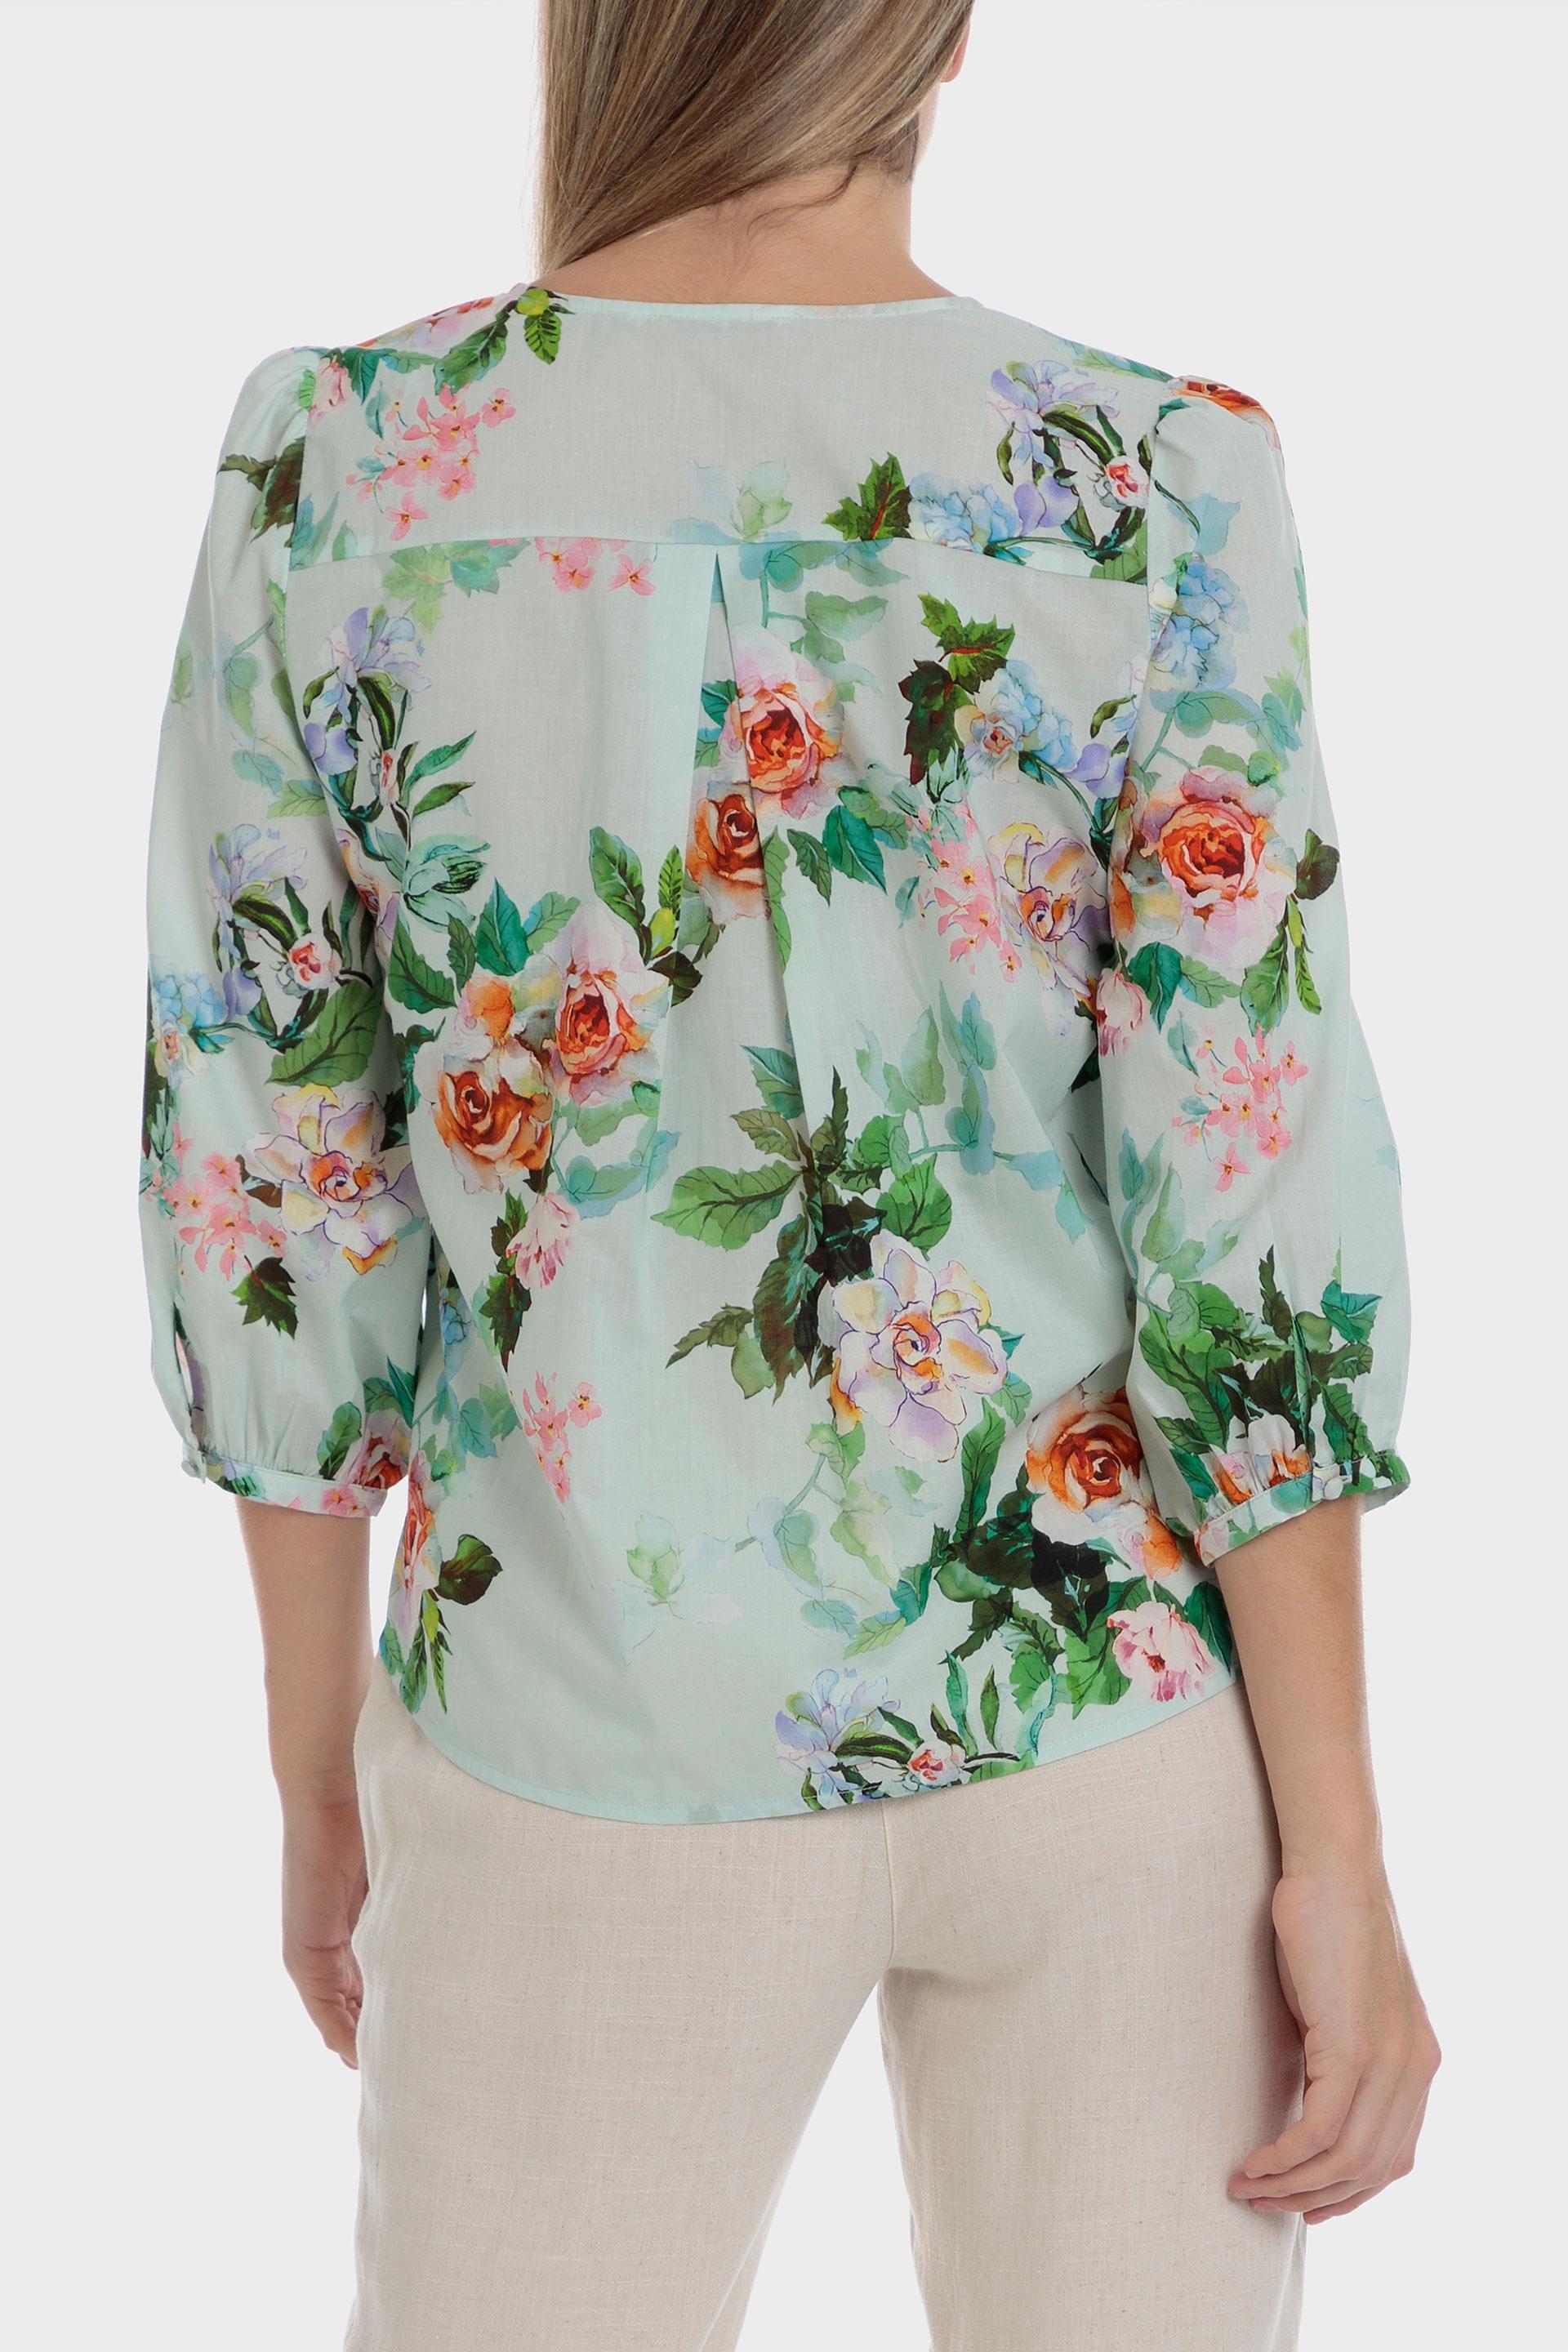 Punt Roma - Green Floral Print Blouse